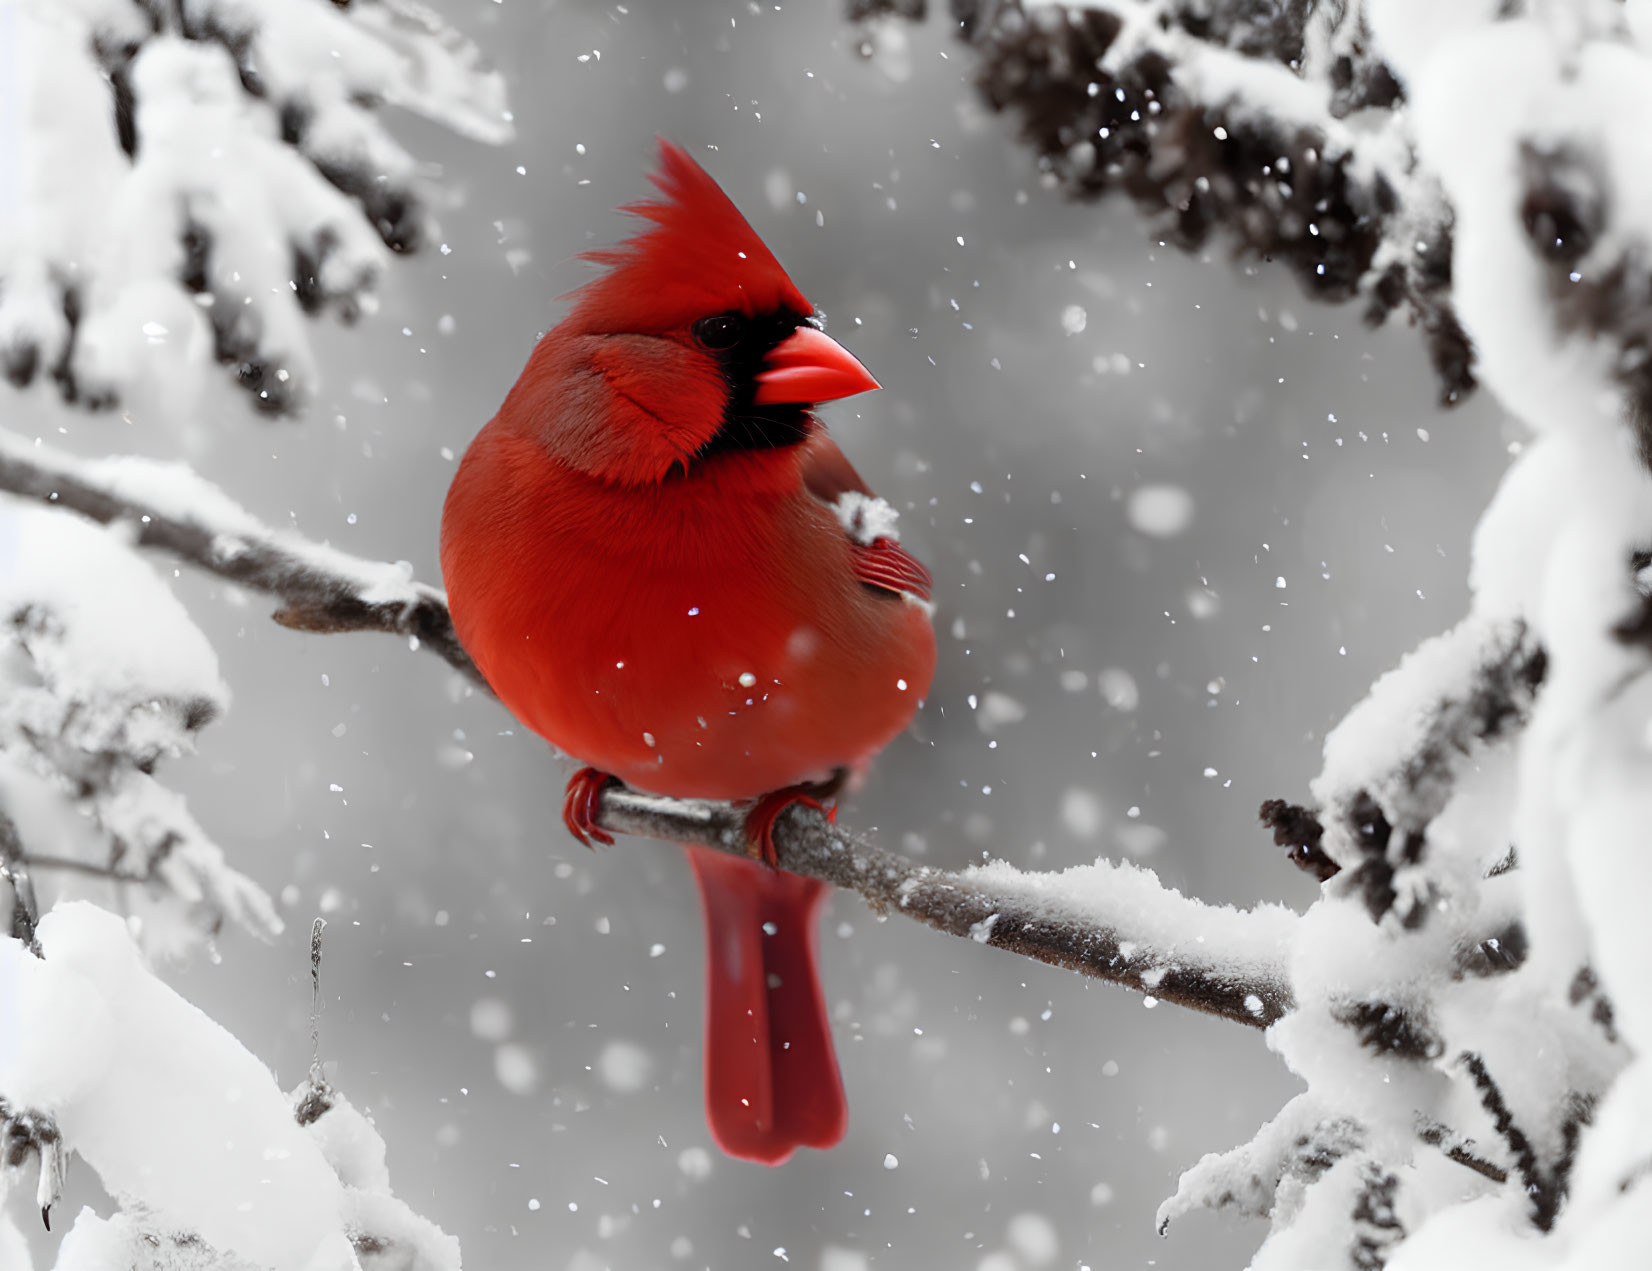 Red cardinal on snowy branch with falling snowflakes